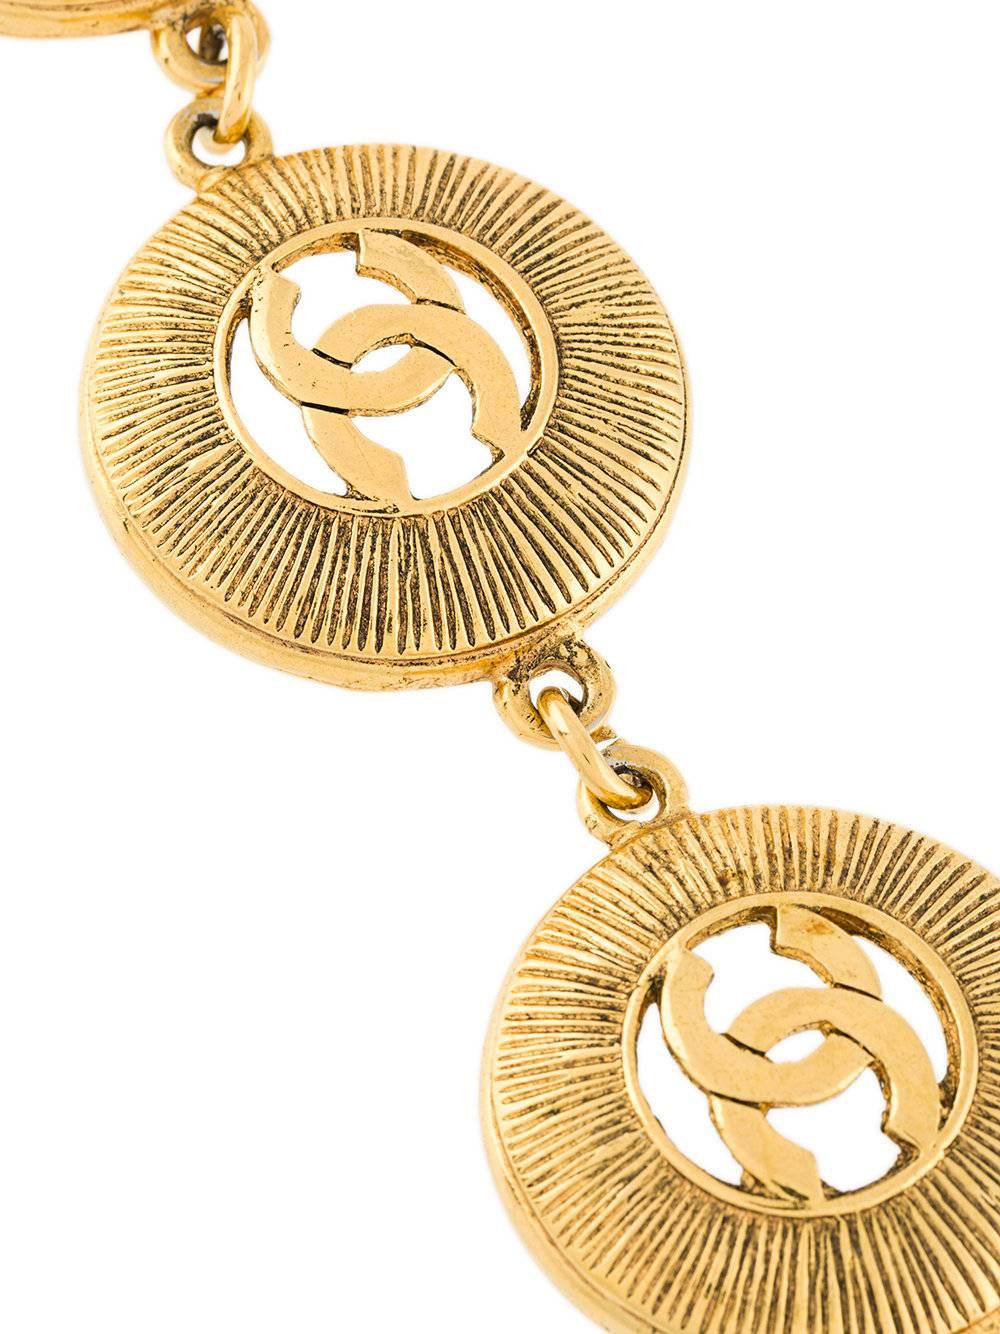 This timeless gold-tone logo medallion bracelet from Chanel features four CC discs, a lobster clasp closure, a signature interlocking CC logo and a chain link strap.

Colour: Gold

Material: Gold Plated Metal (Other)

Condition: 9.5 out of 10
Very